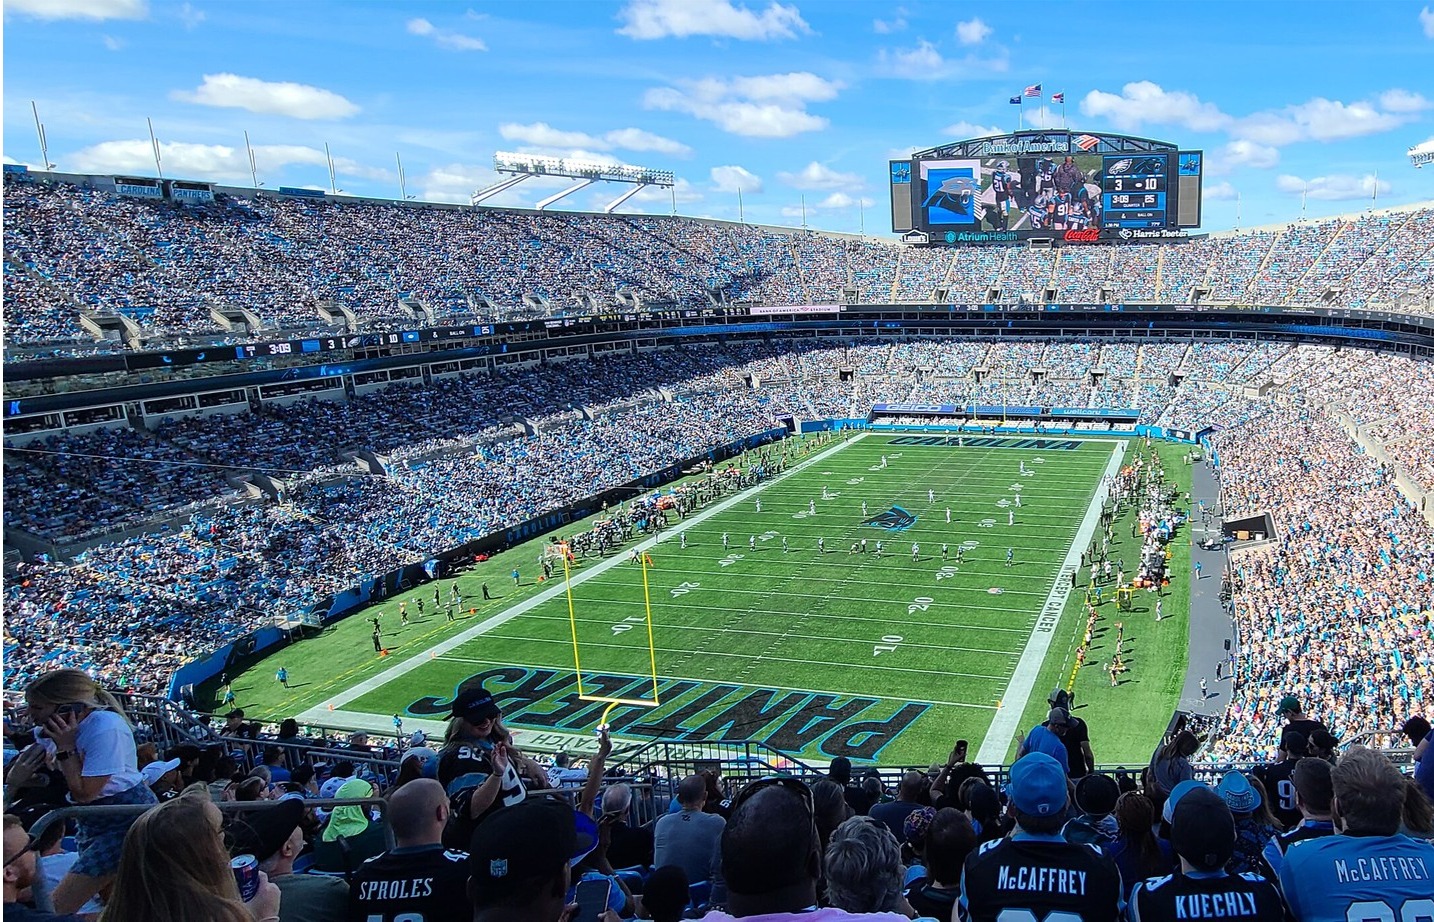 View from the upper deck at Bank of America Stadium, home of the Carolina Panthers